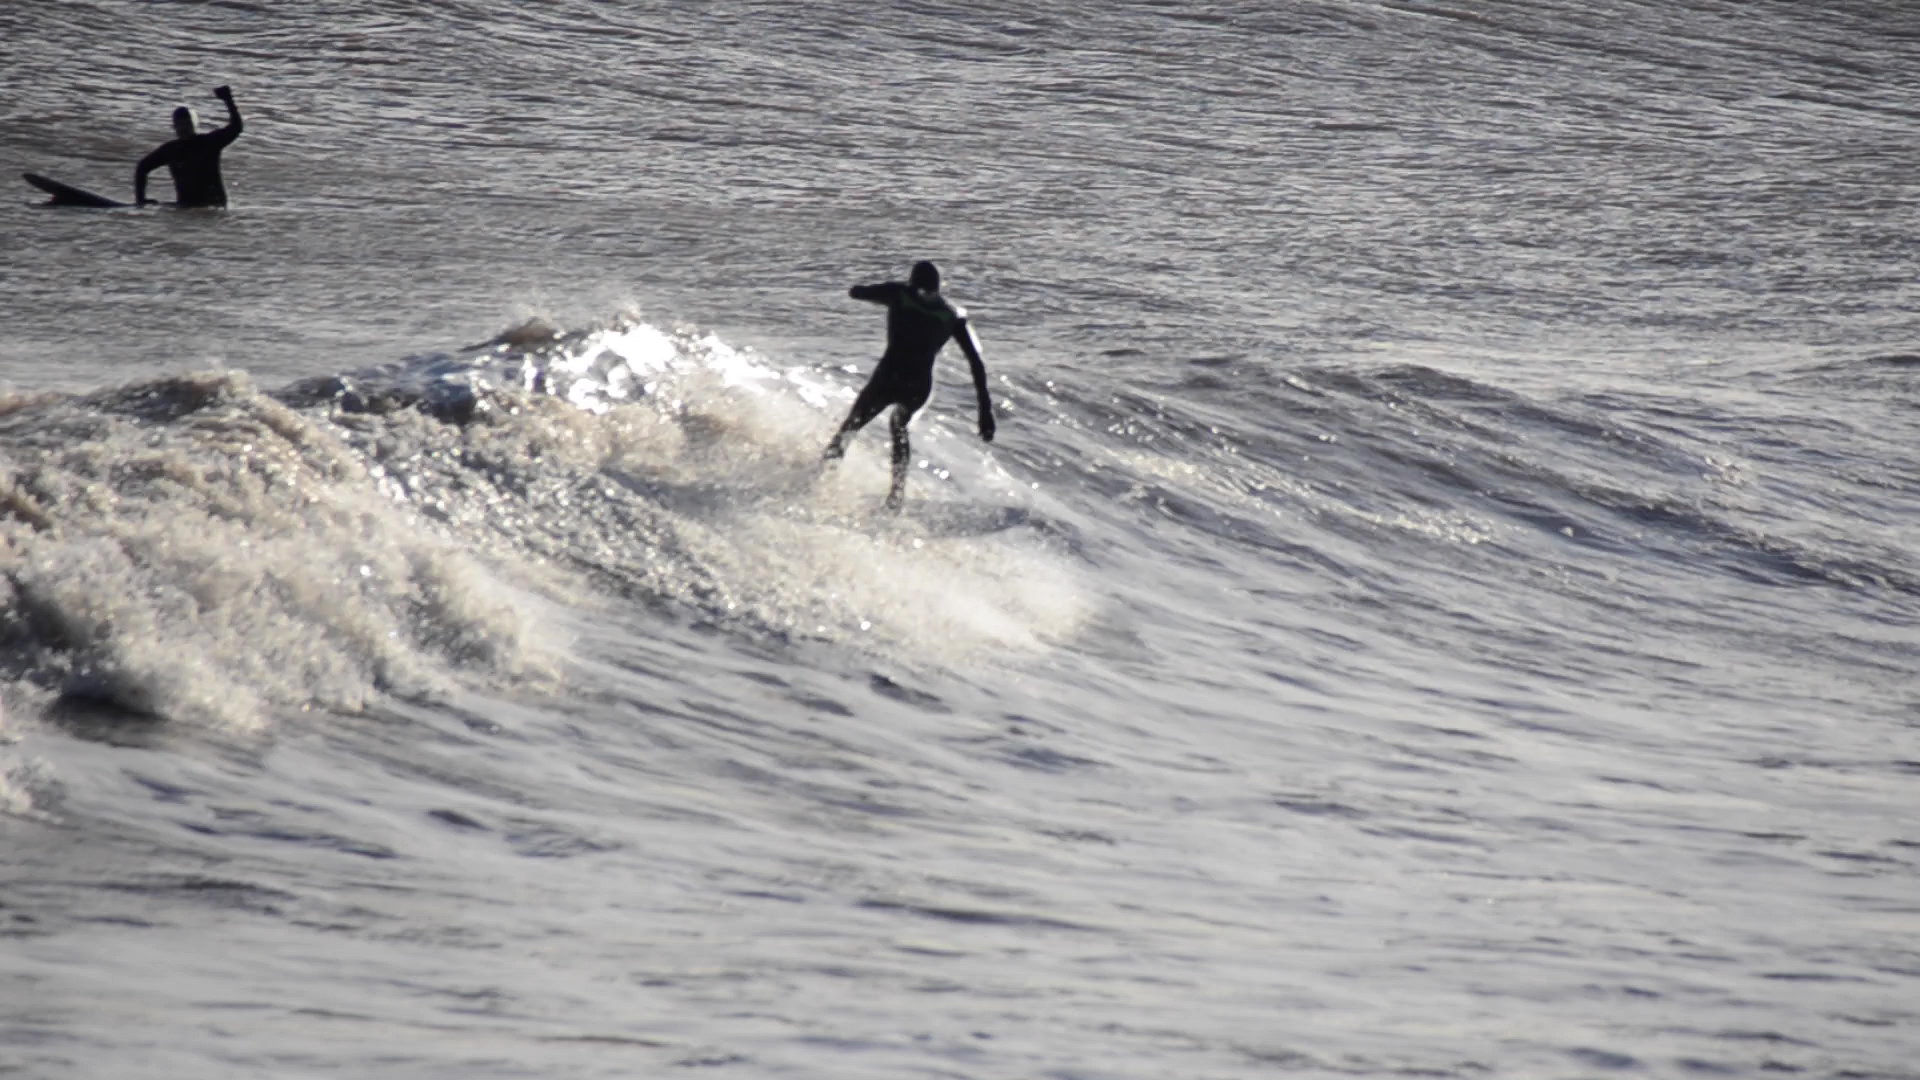 Return to Yellow Lincolnshire Surfing Movie